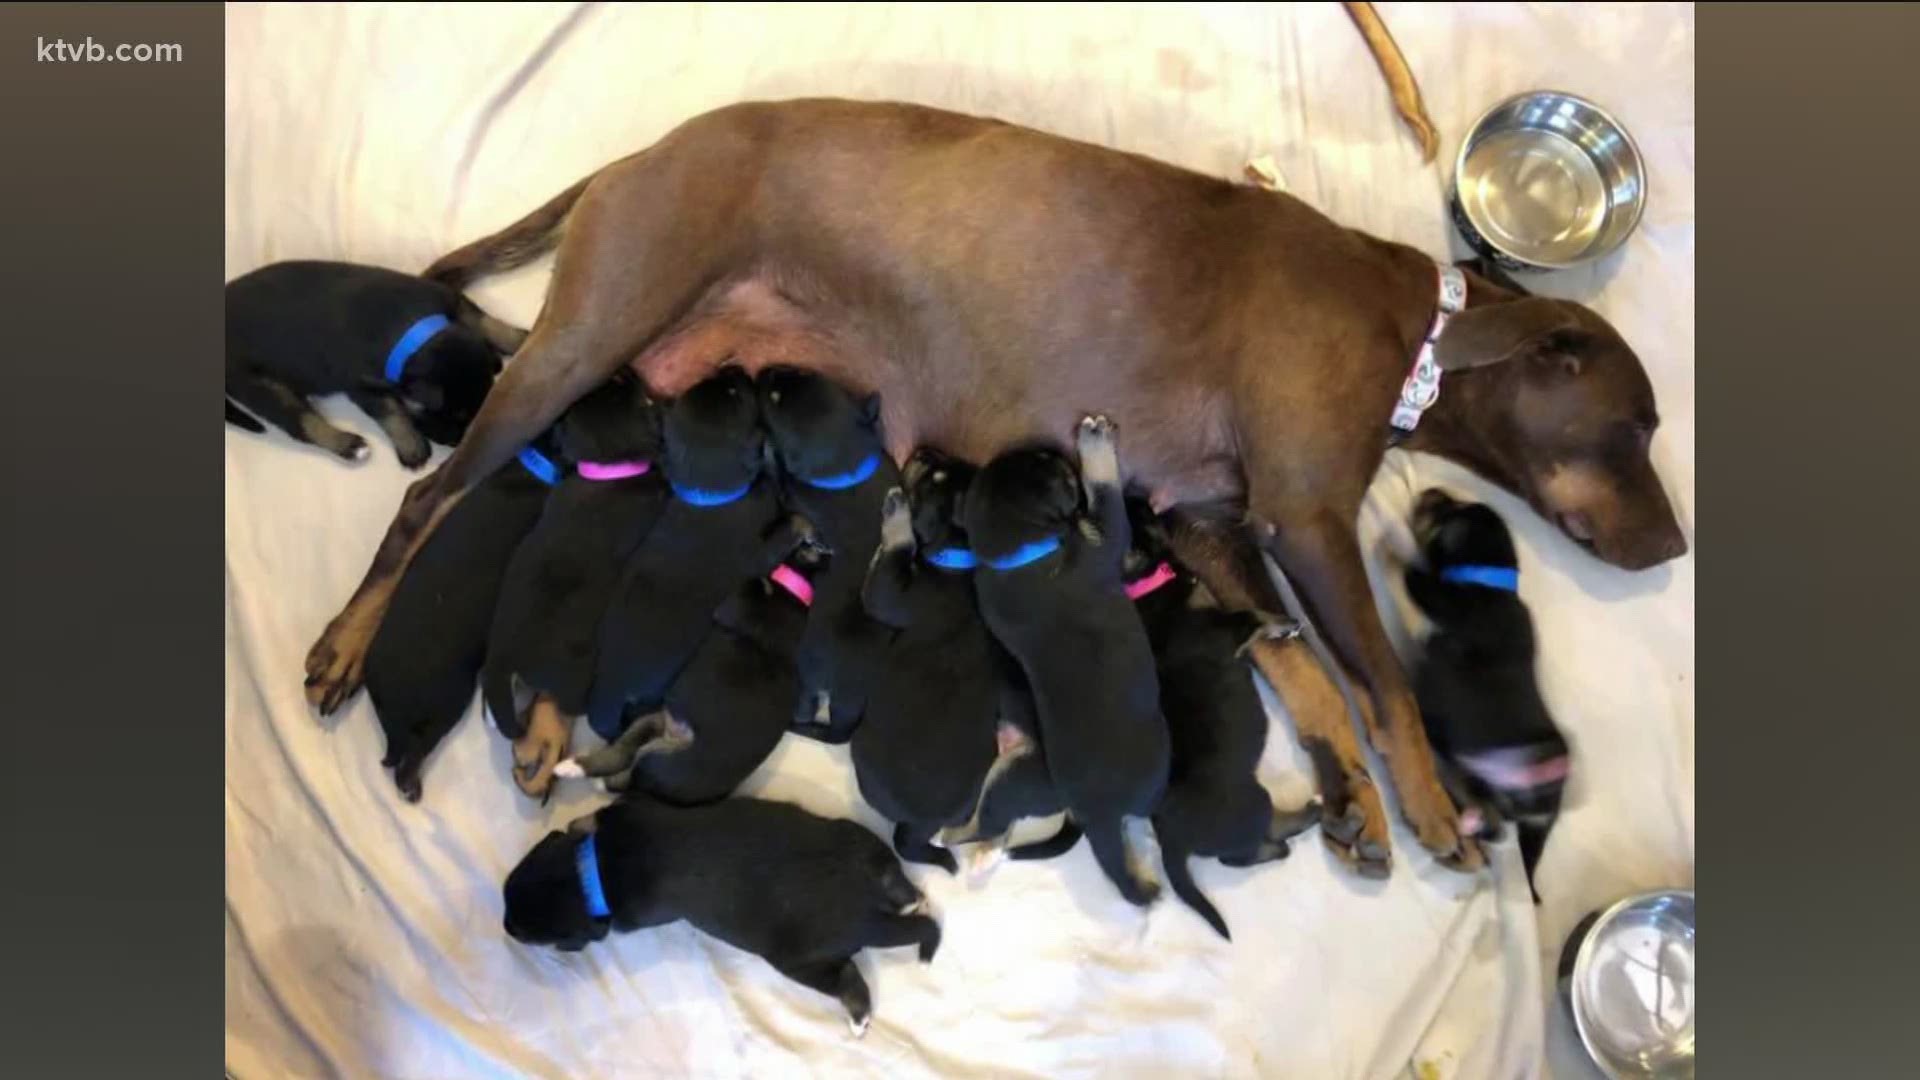 The mother and her pups have been handed over to the Idaho Humane Society and will be placed in foster care until they are ready for adoption.